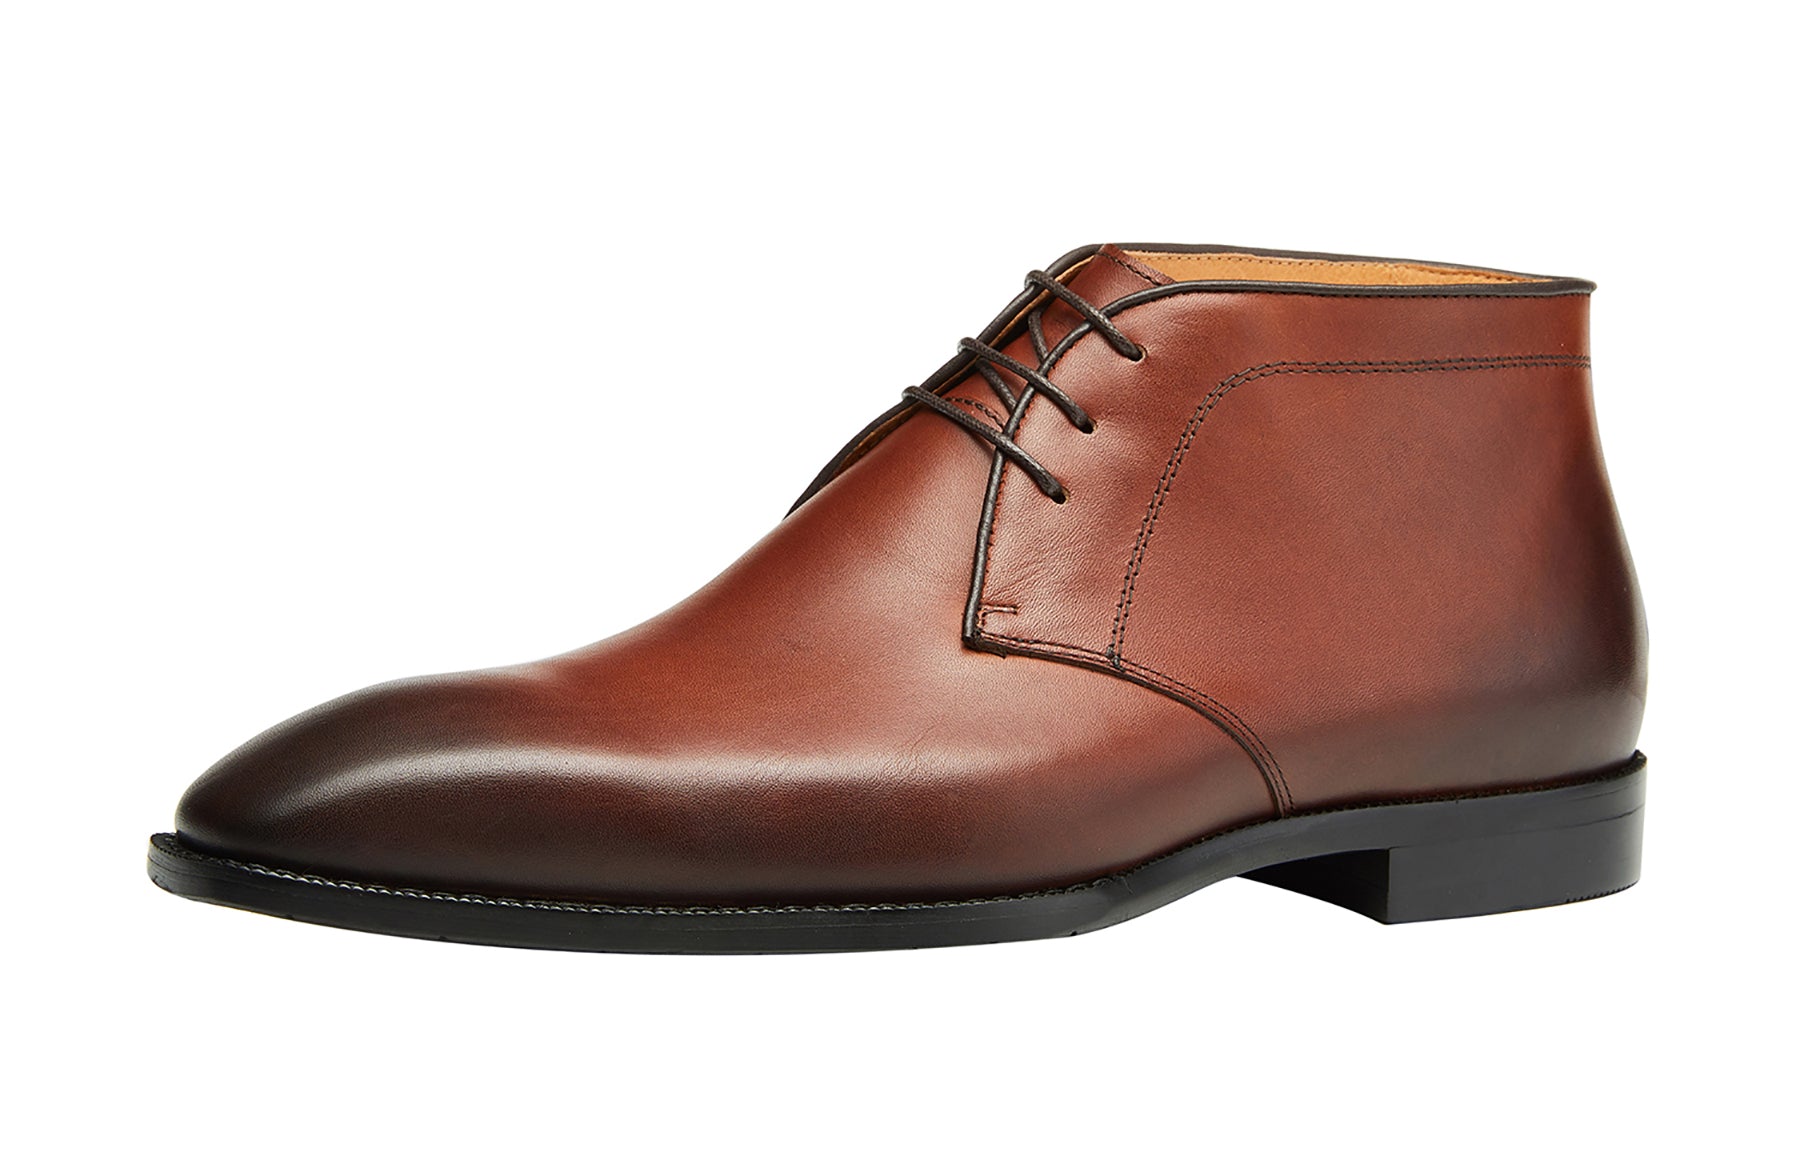 Men's Formal Leather Chukka Boots